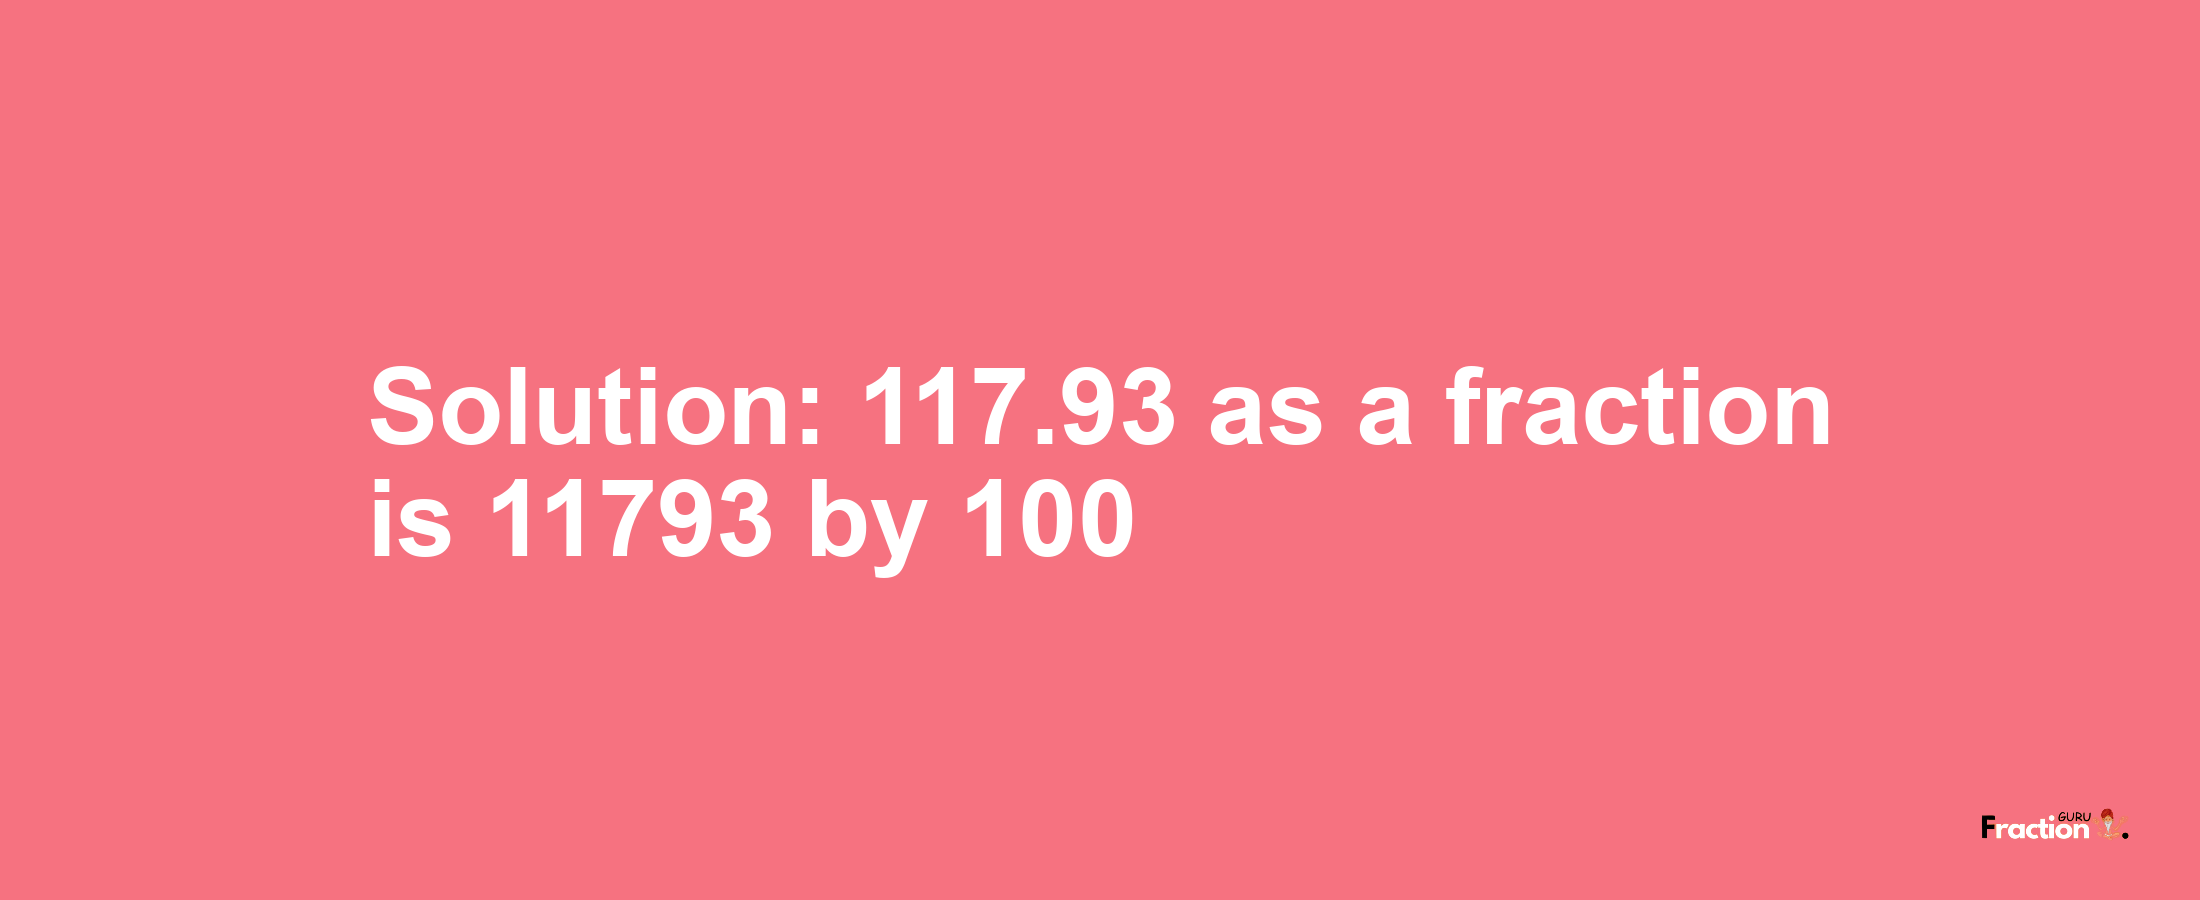 Solution:117.93 as a fraction is 11793/100